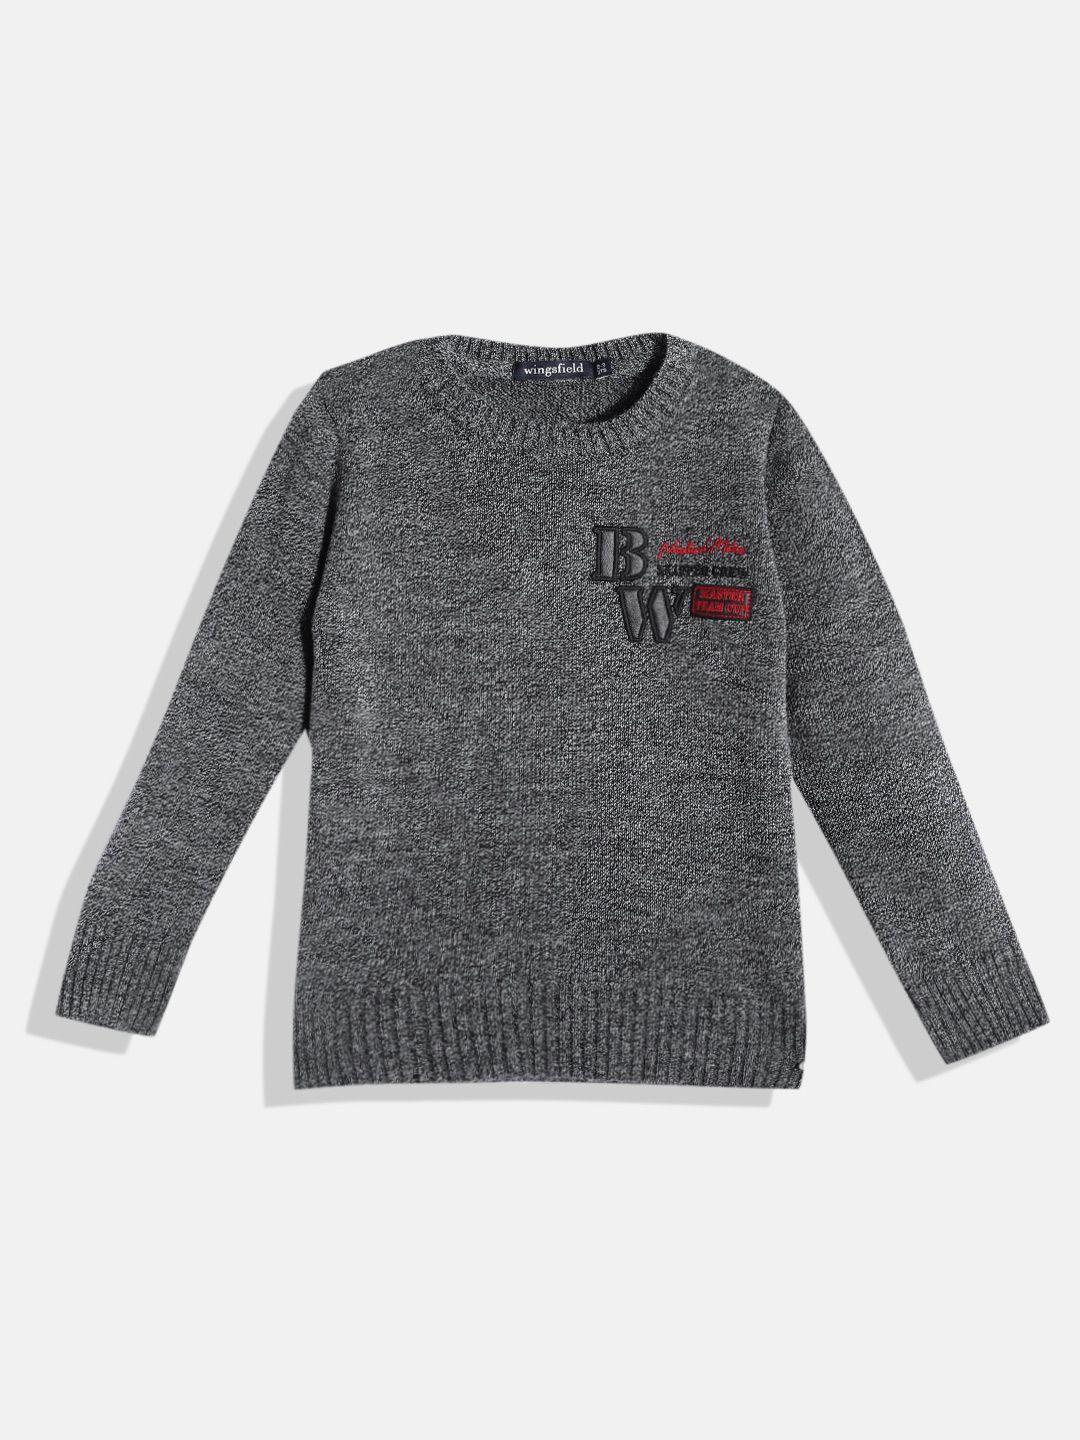 wingsfield-boys-charcoal-grey-acrylic-pullover-with-embroidered-detail